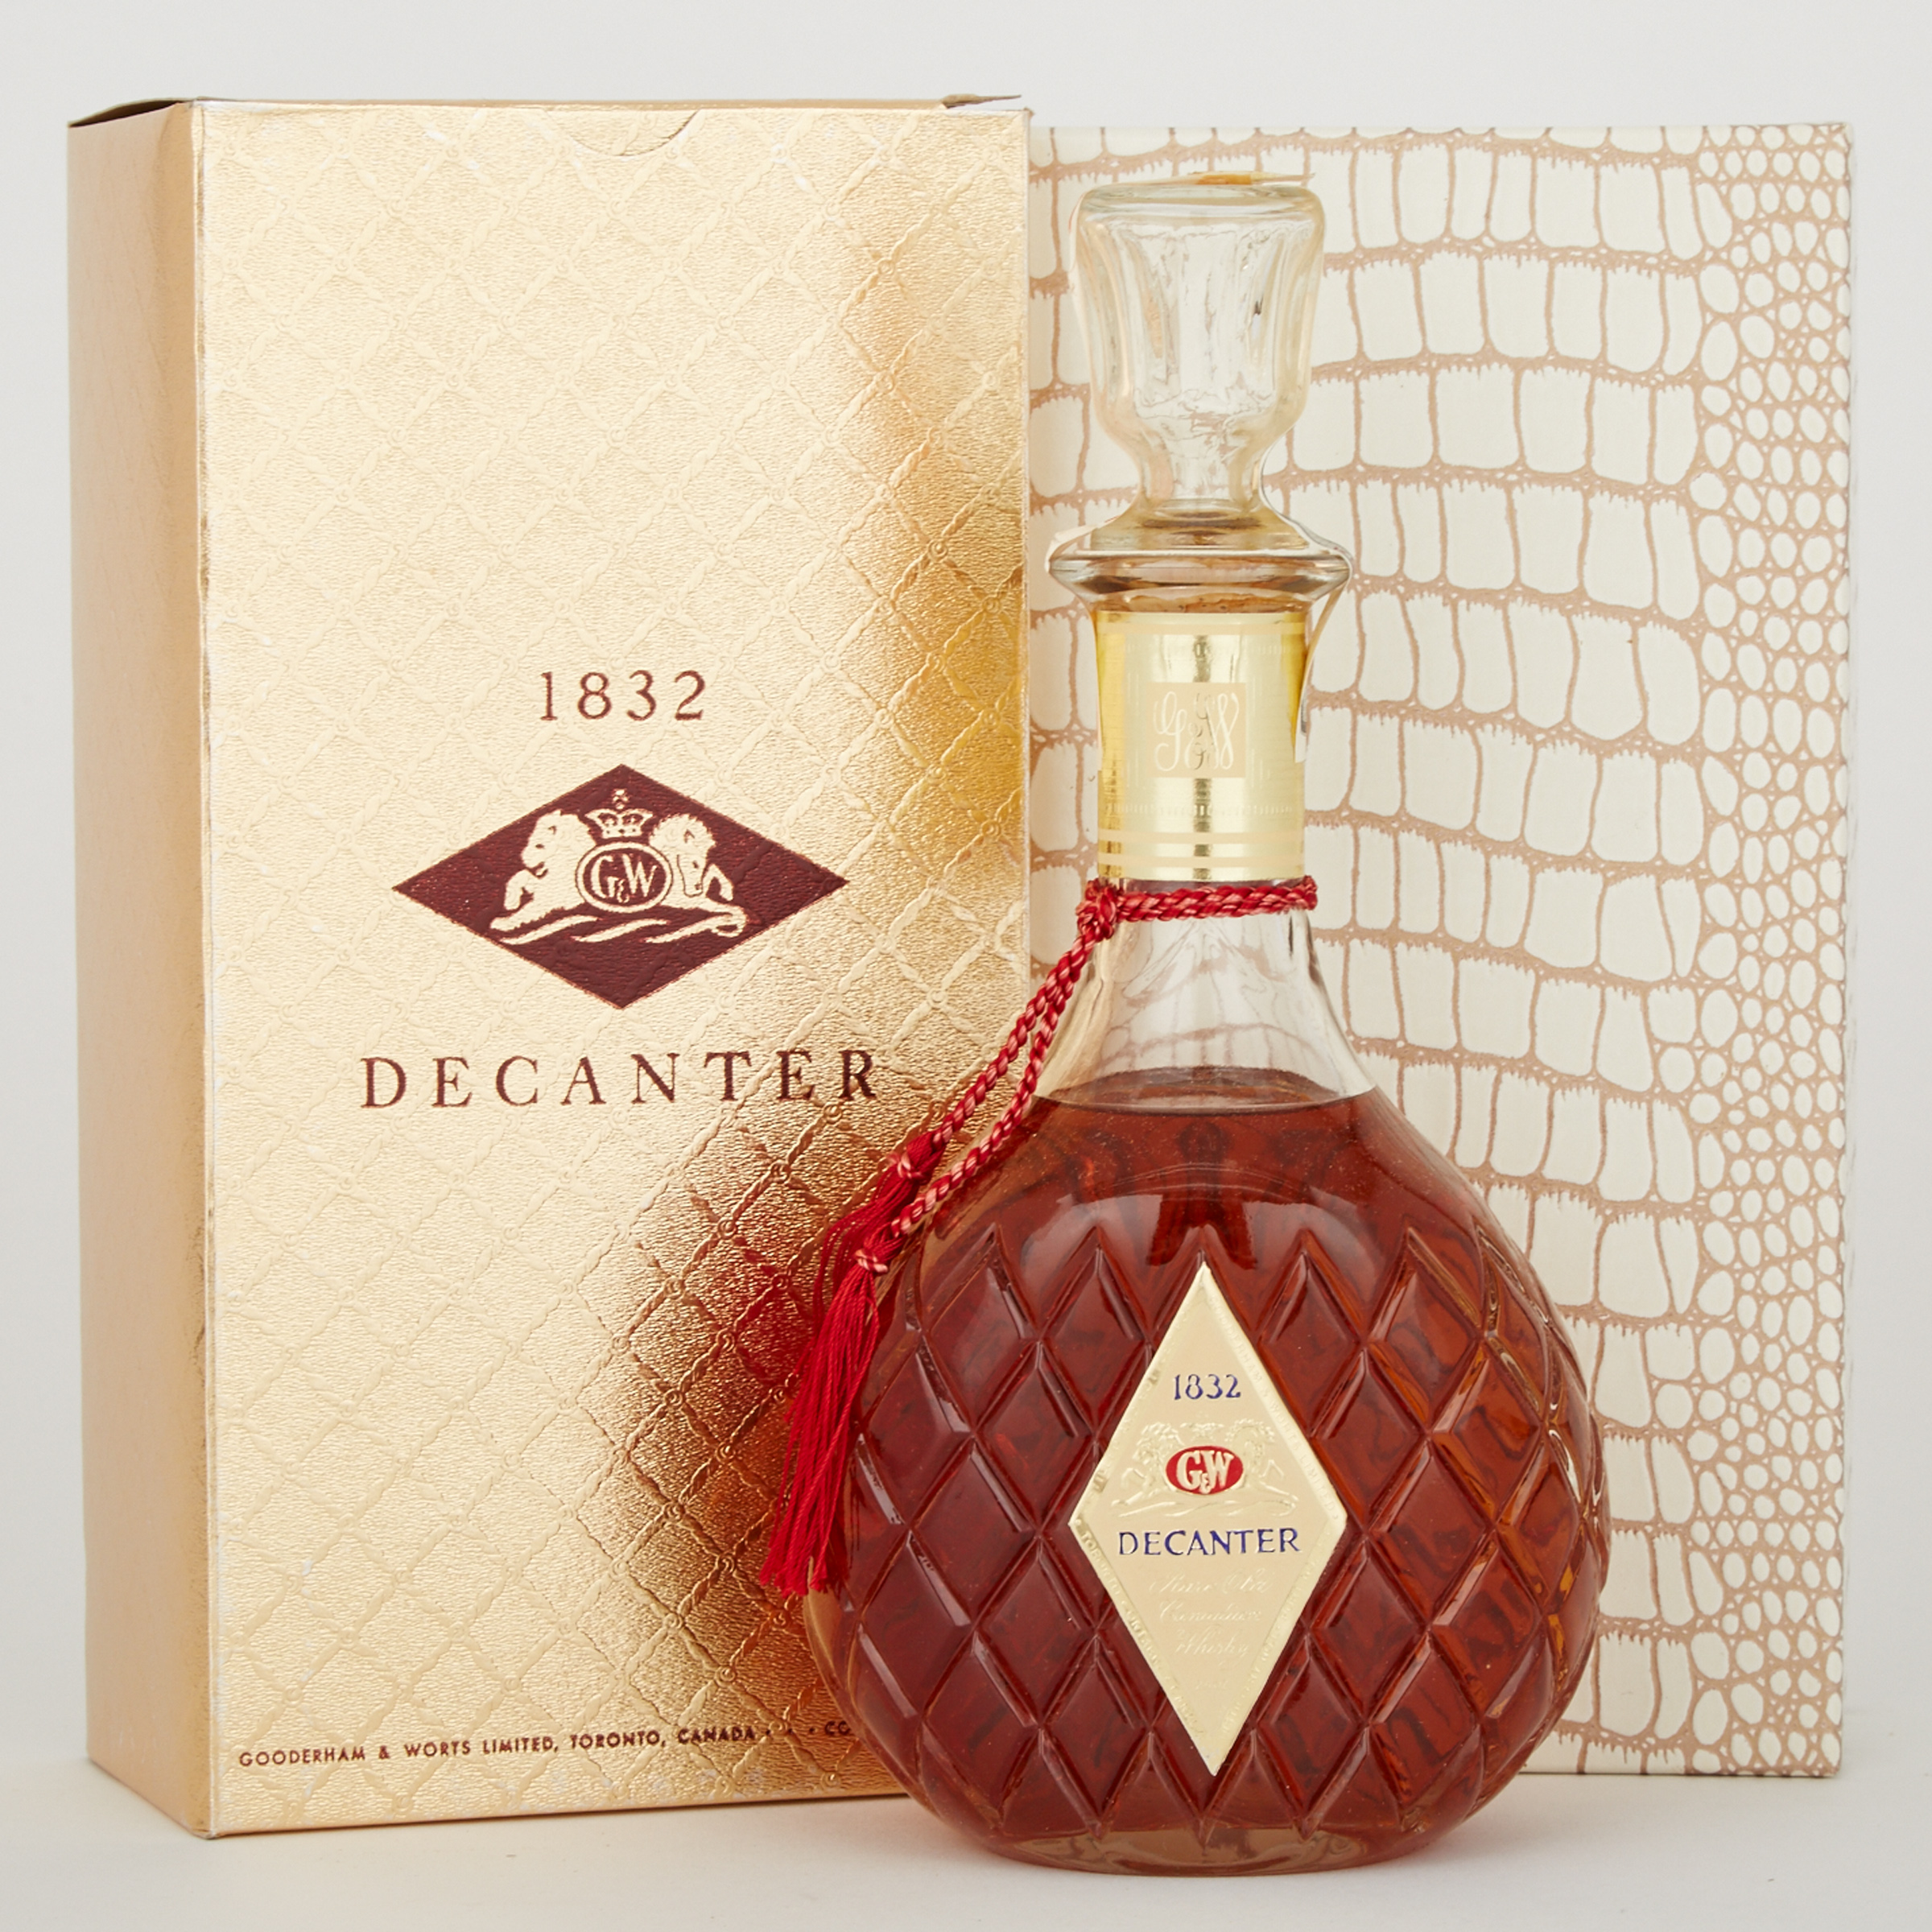 GOODERHAM & WORTS 1832 DECANTER RARE OLD CANADIAN WHISKY (ONE 25 OZ)